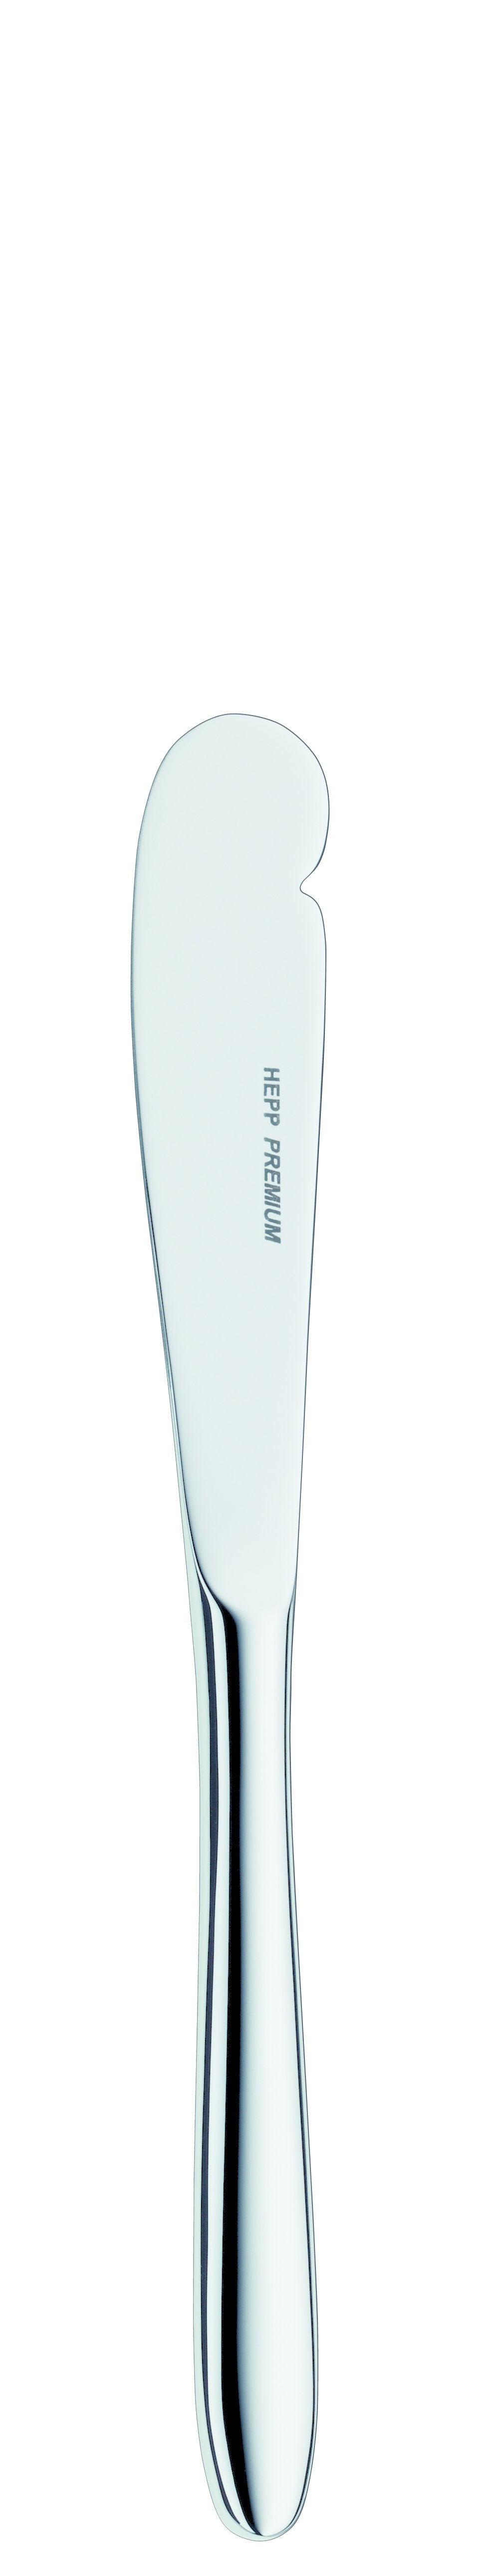 Butter knife MB ECCO 170mm